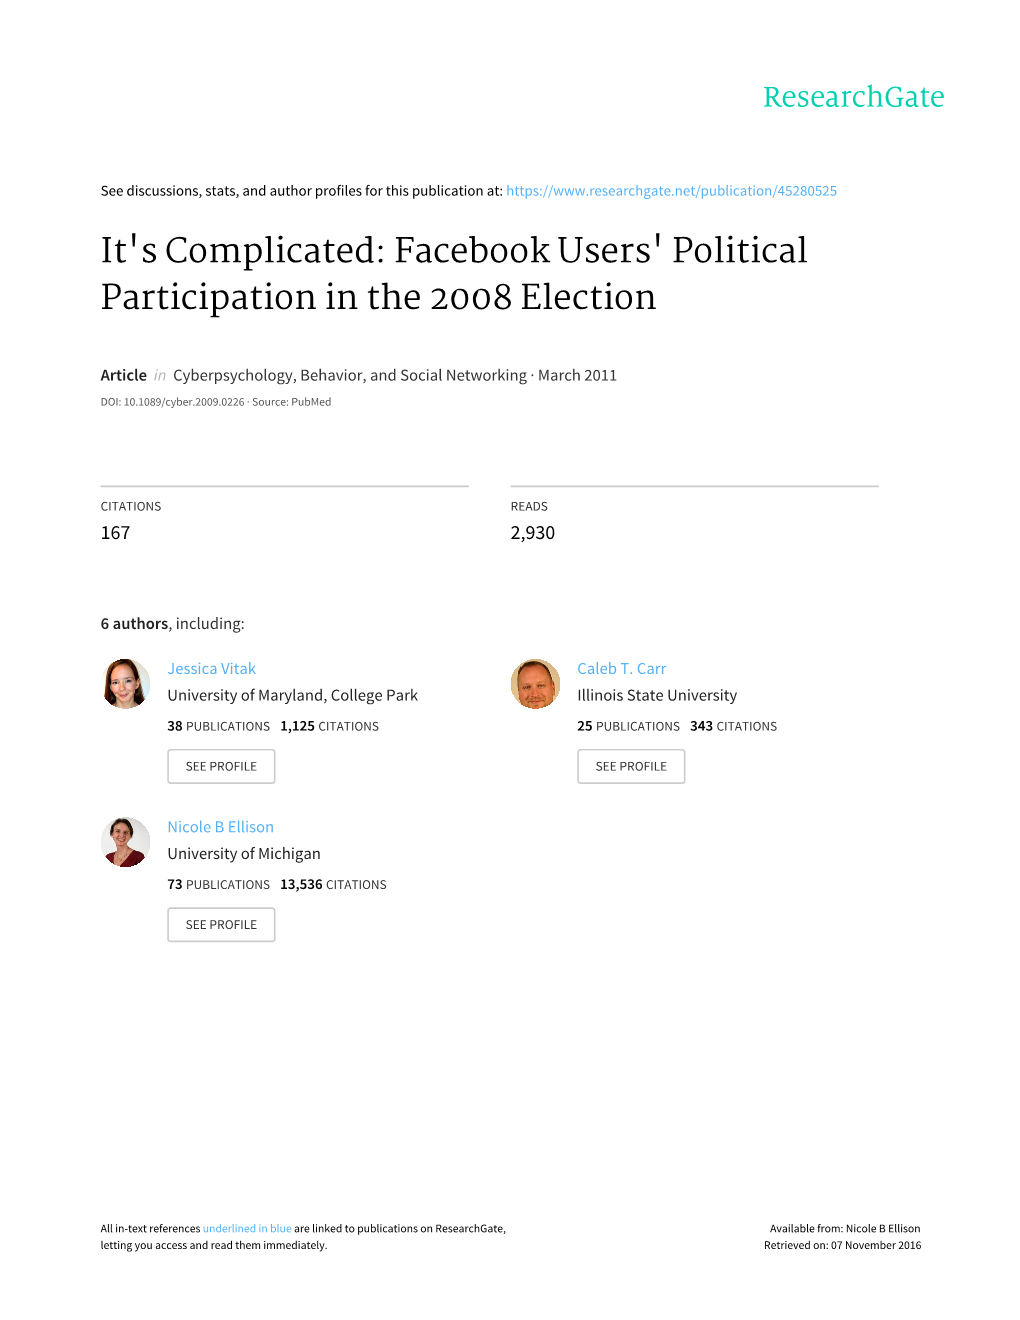 Facebook Users' Political Participation in the 2008 Election